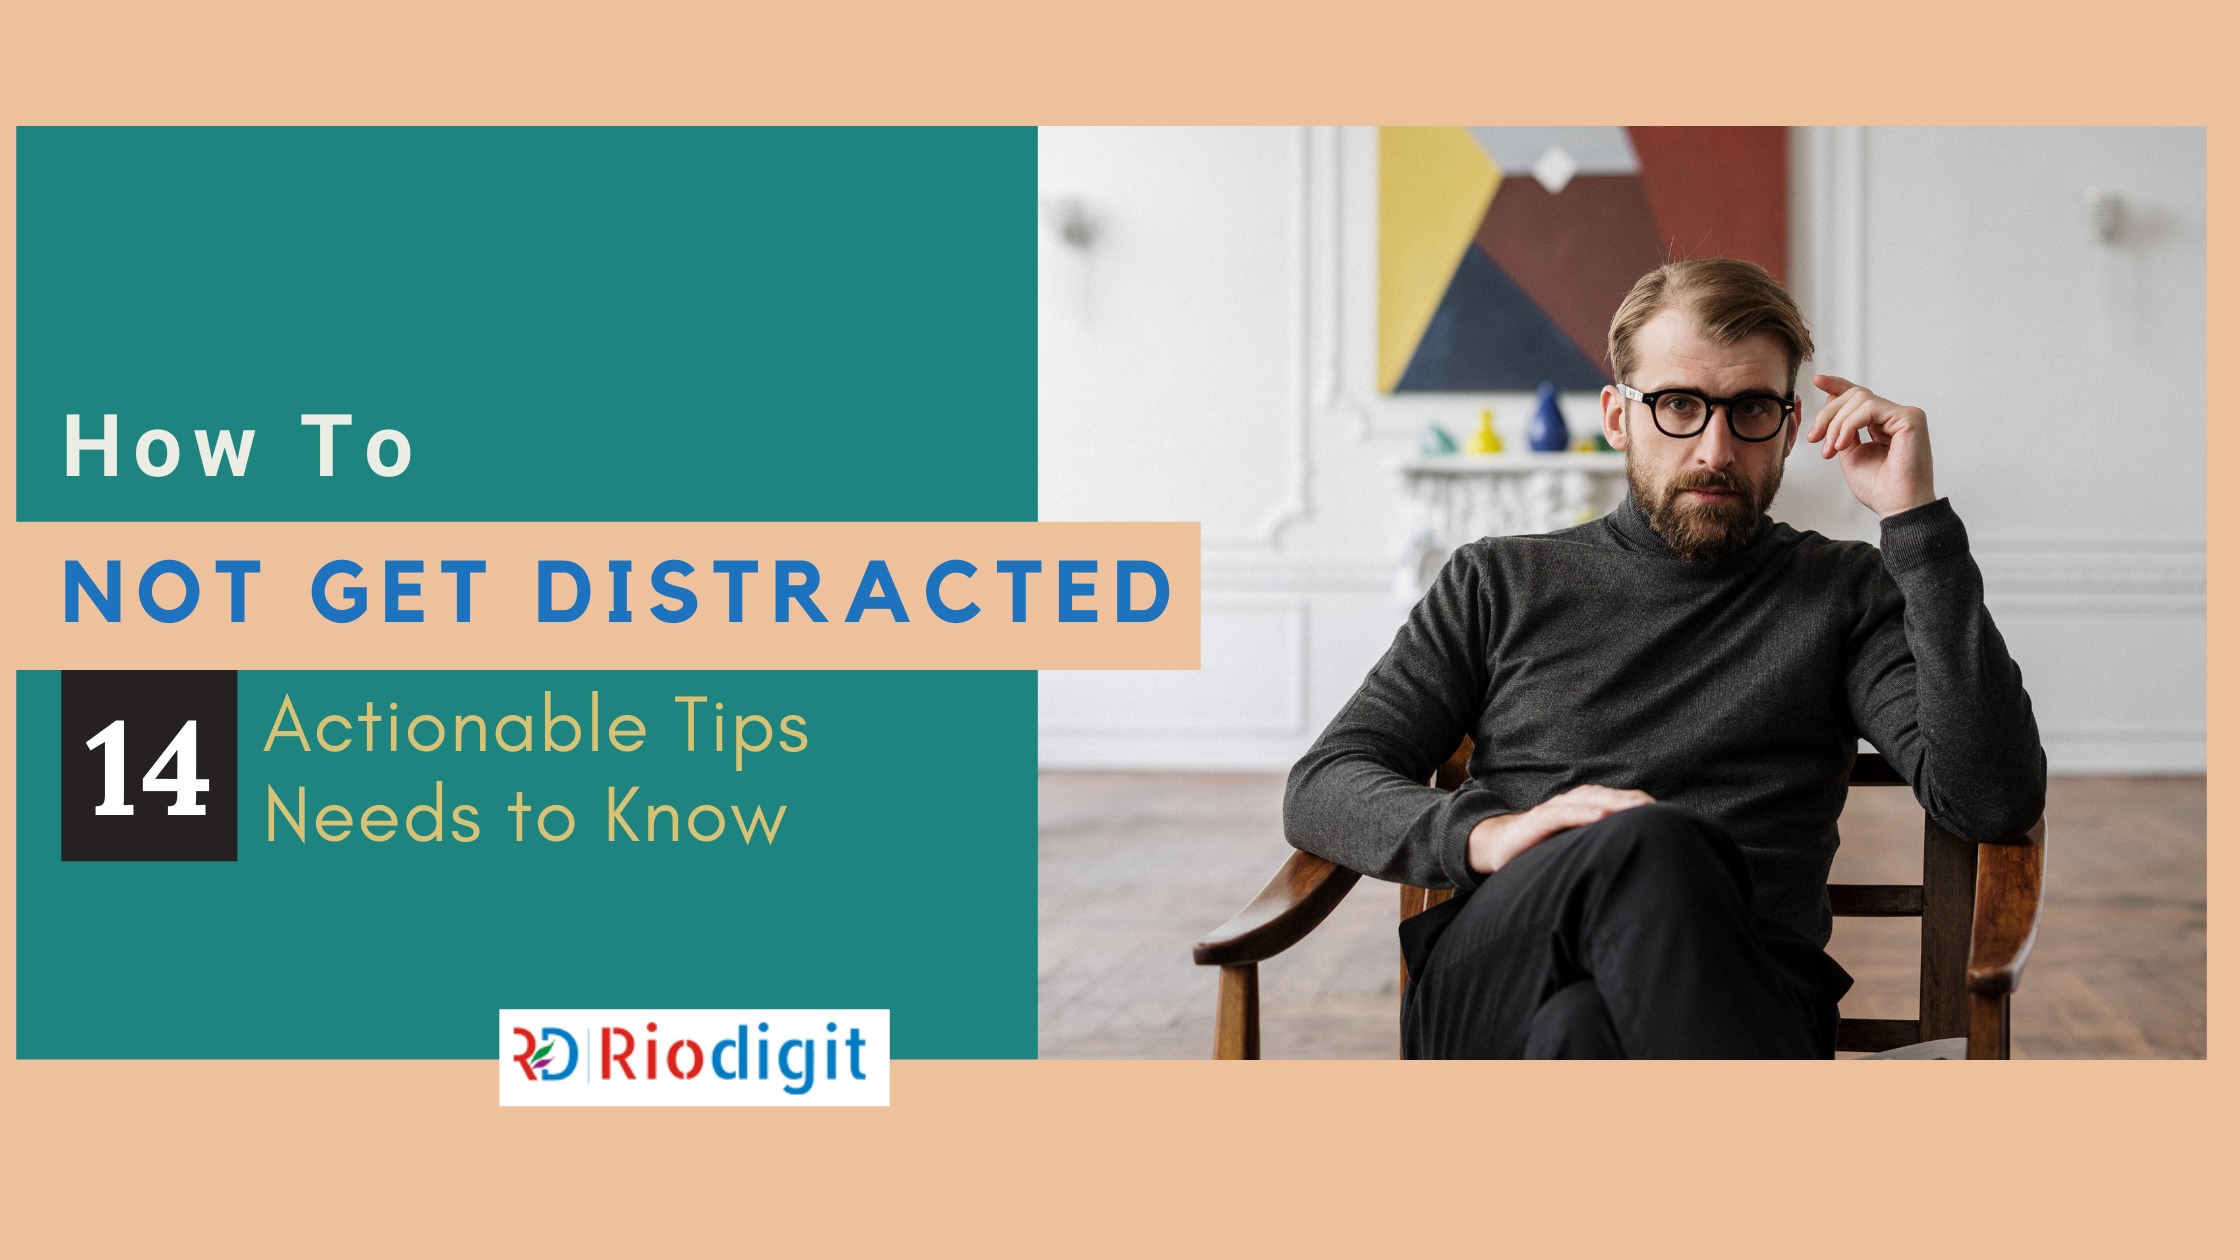 How to Not Get Distracted